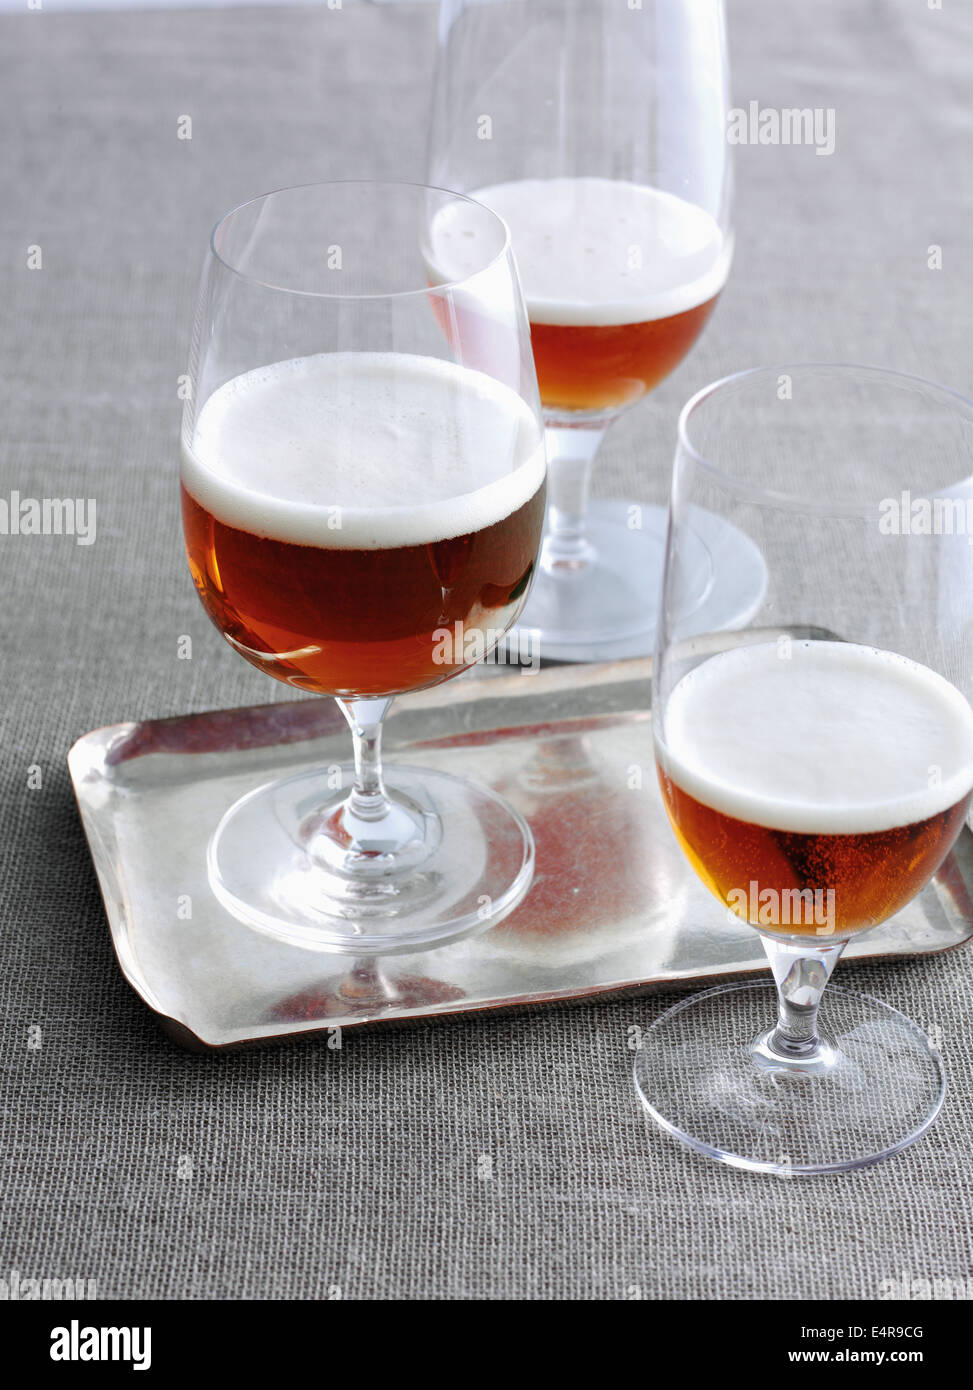 Three glasses of Imperial IPA beer Stock Photo